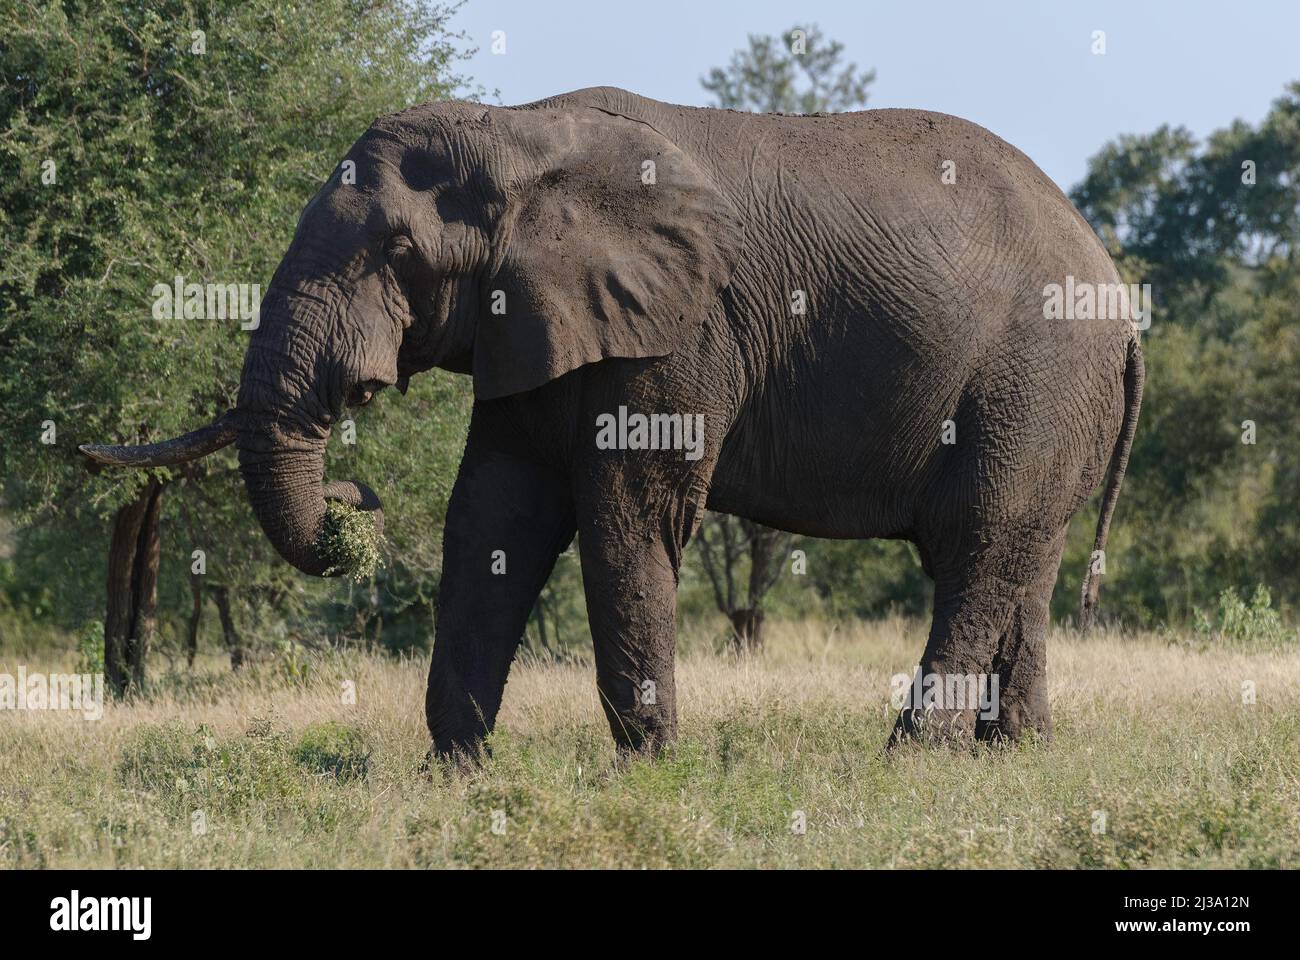 A large African elephant with tusks, on the move in Kruger National Park, South Africa Stock Photo